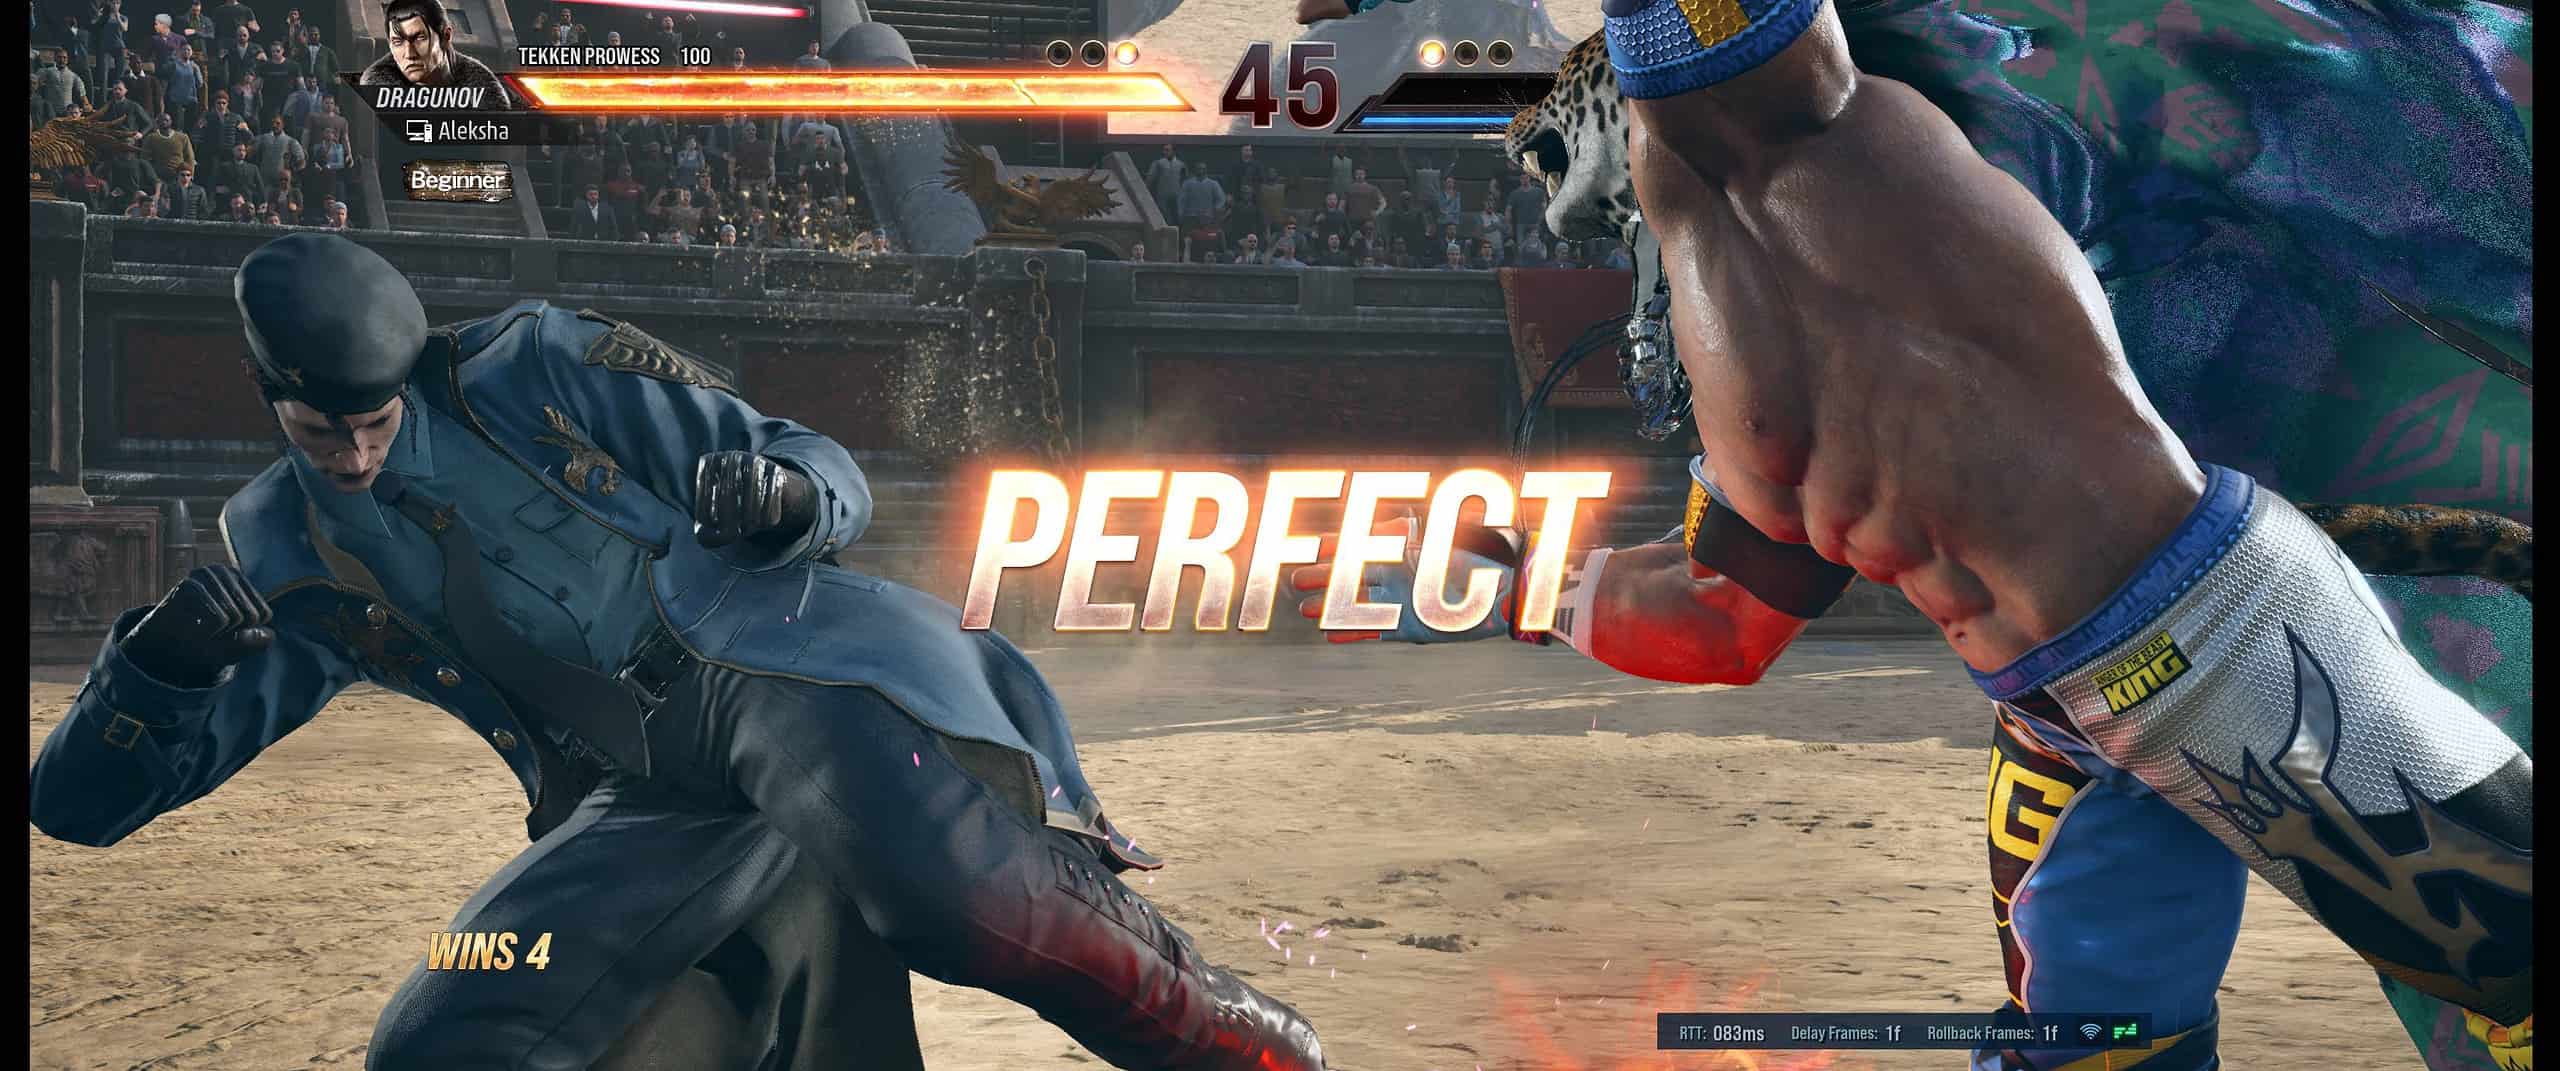 A screenshot of two fighters engaging in combat in Tekken 8, showcasing the intense action of this video game.